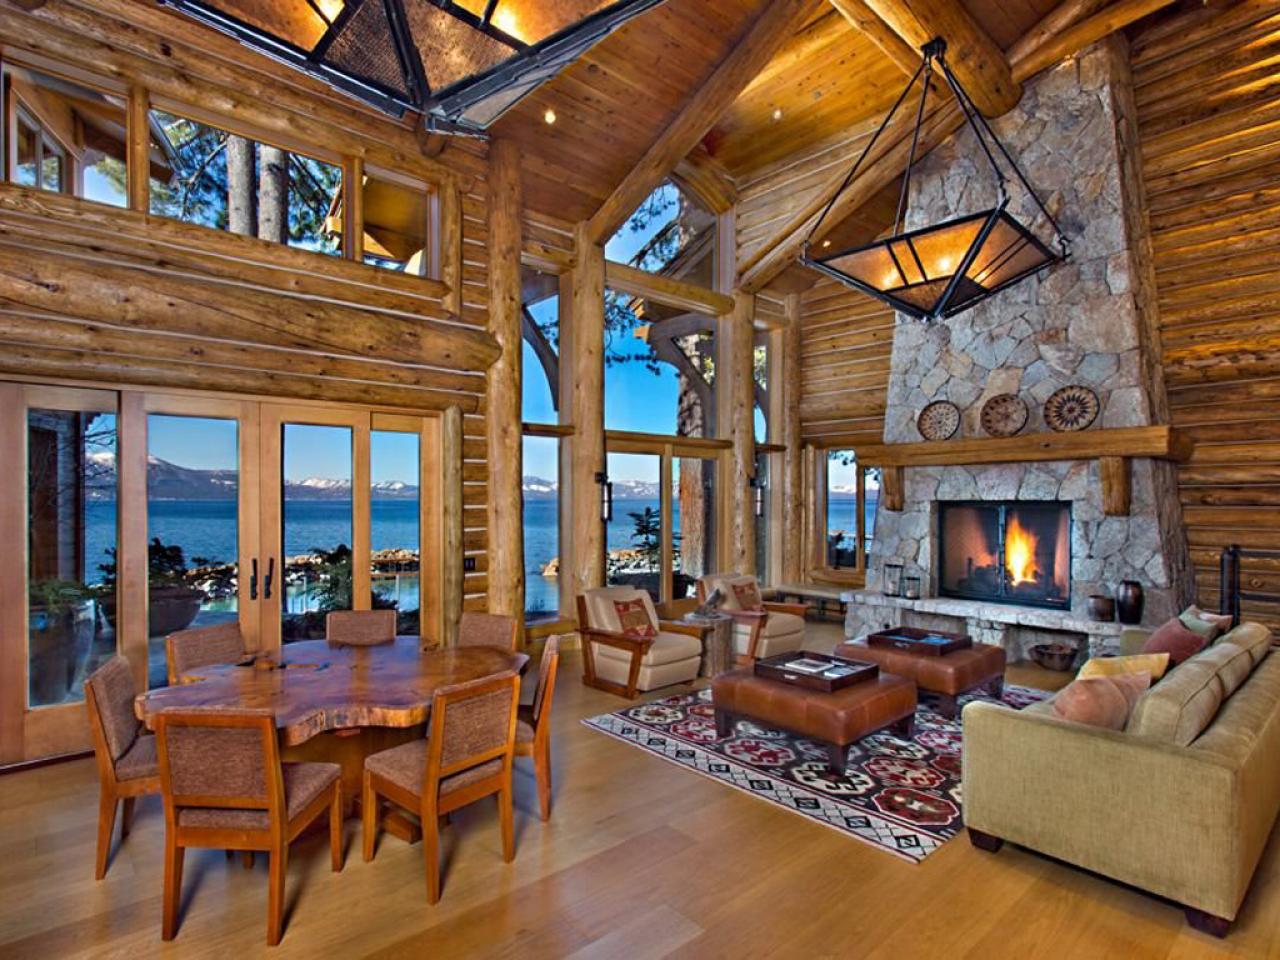 10 luxe log cabins to indulge in on national log cabin day